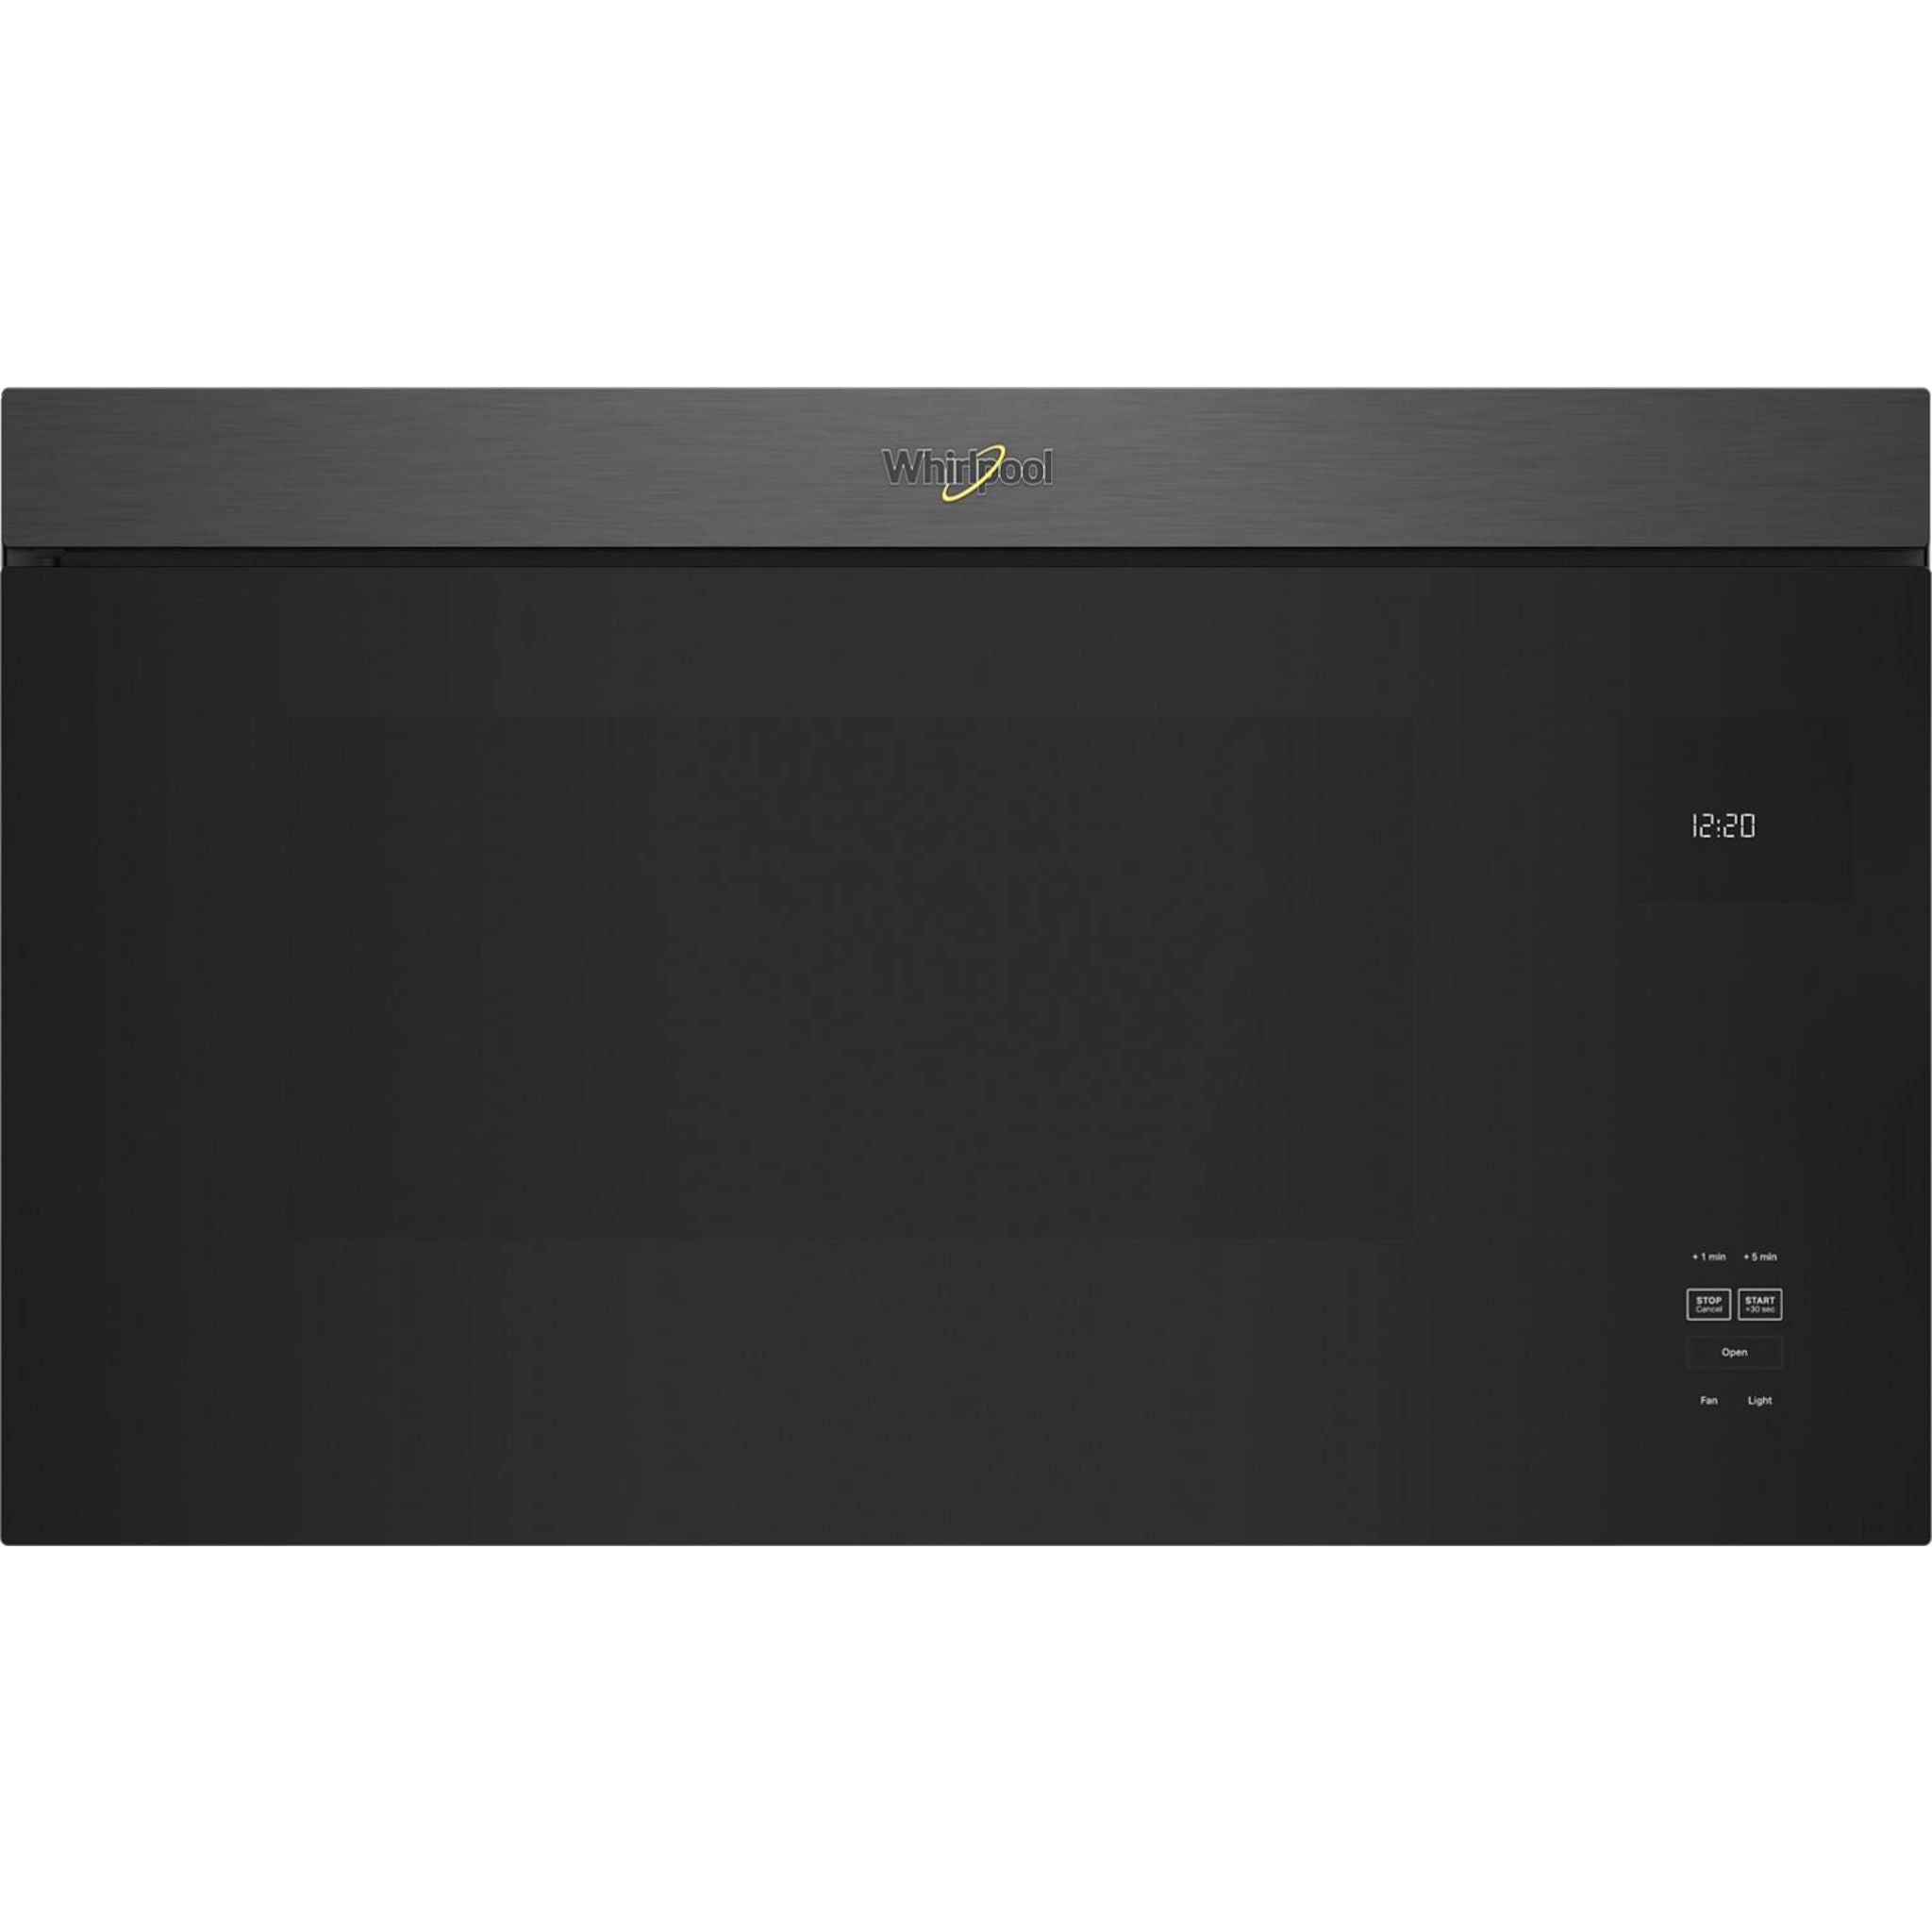 Whirlpool, Whirlpool  Over The Range Microwave (YWMMF5930PV) - Black Stainless